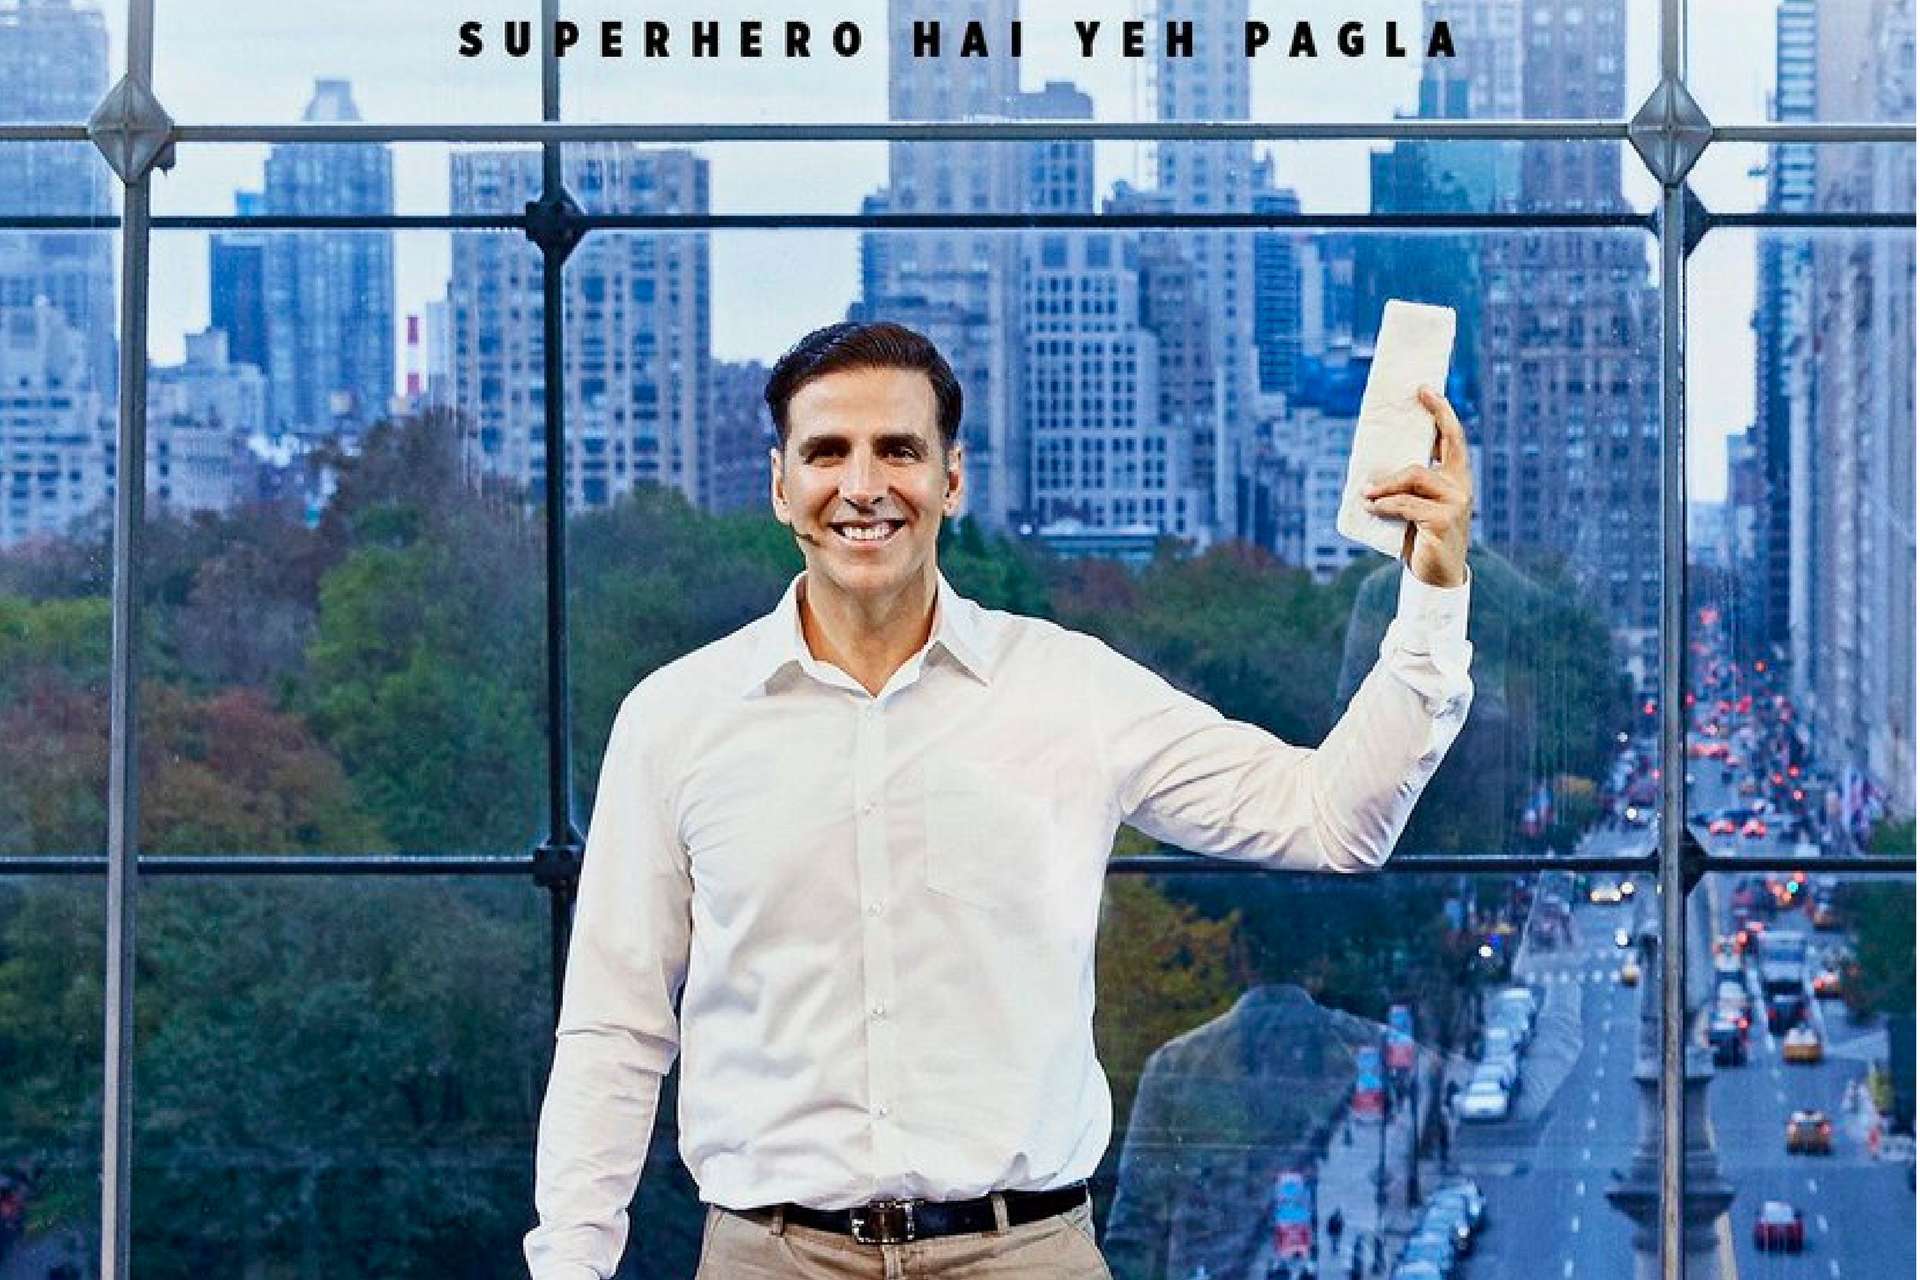 Padman performs fairly well at the box-office 